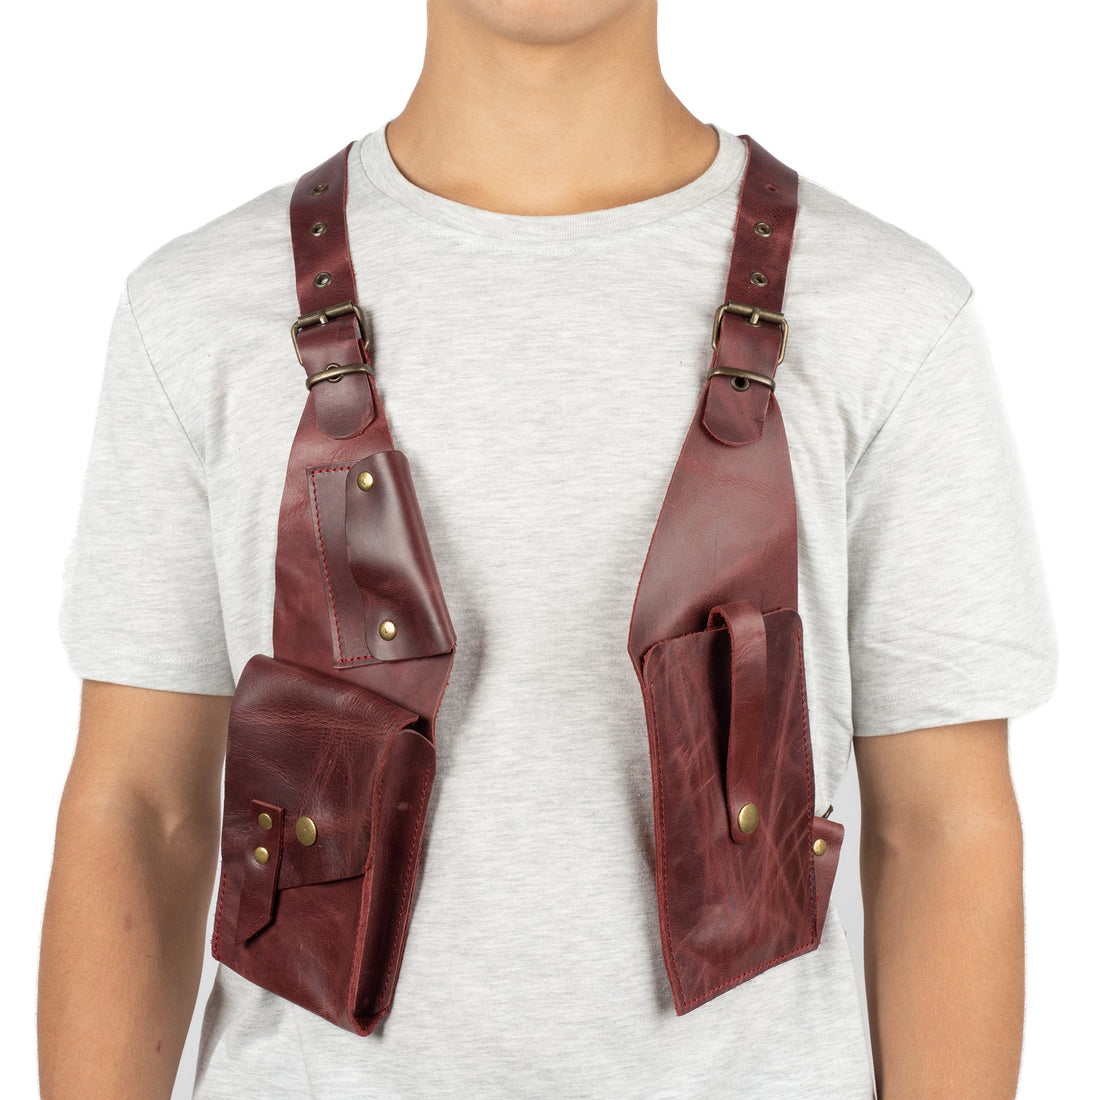 Capella Red Shoulder Leather Holster With Pocket - Zengoda Shop online from Artisan Brands